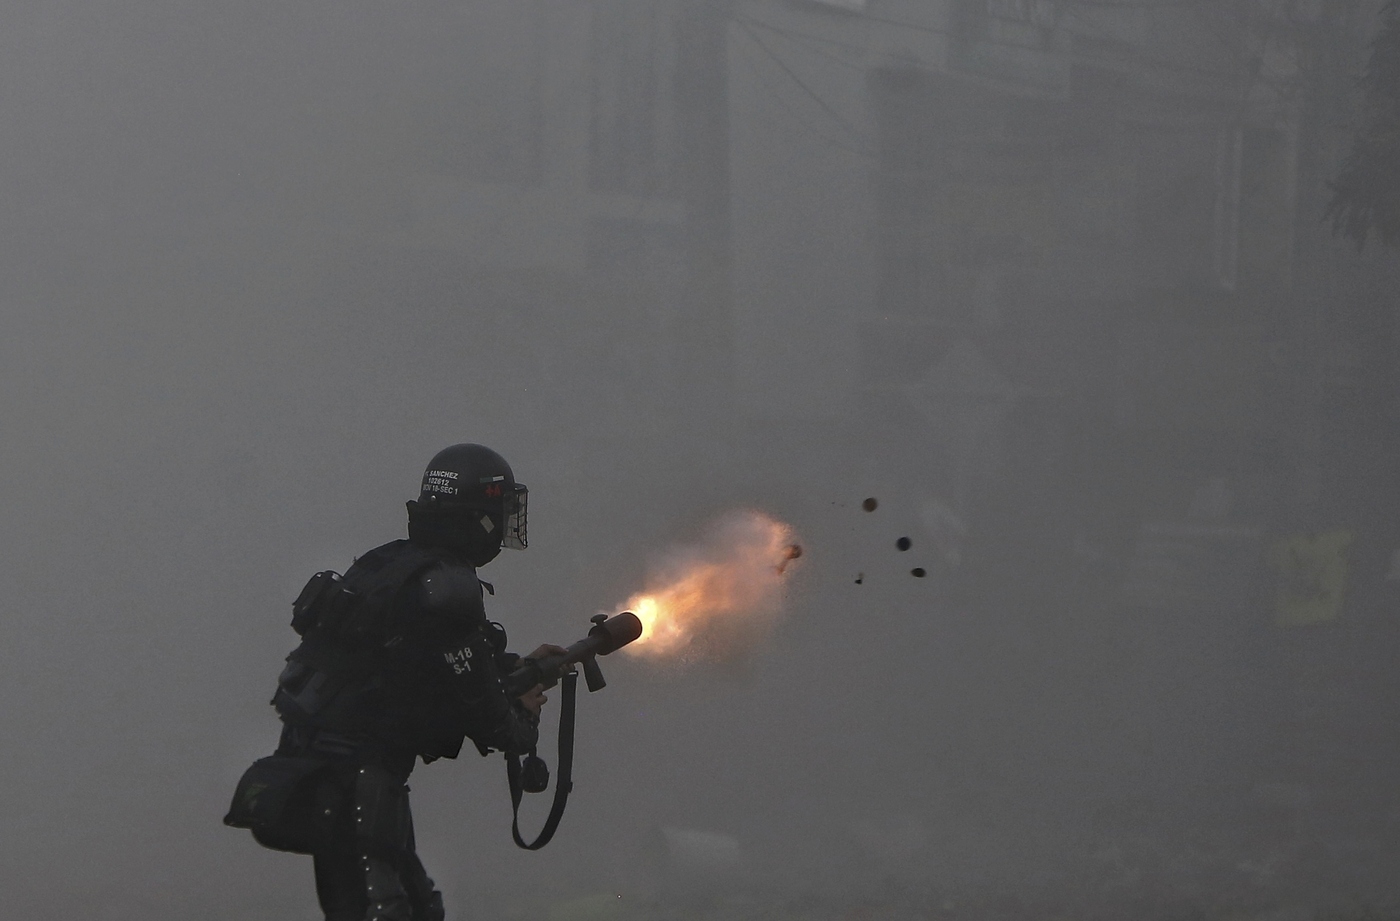 A police officer fires tear gas at protesters during a strike against tax reform in Cali, Colombia, Monday, May 3, 2021. Colombia's President Ivan Duque withdrew the government-proposed tax reform on Sunday. (AP Photo/Andres Gonzalez)